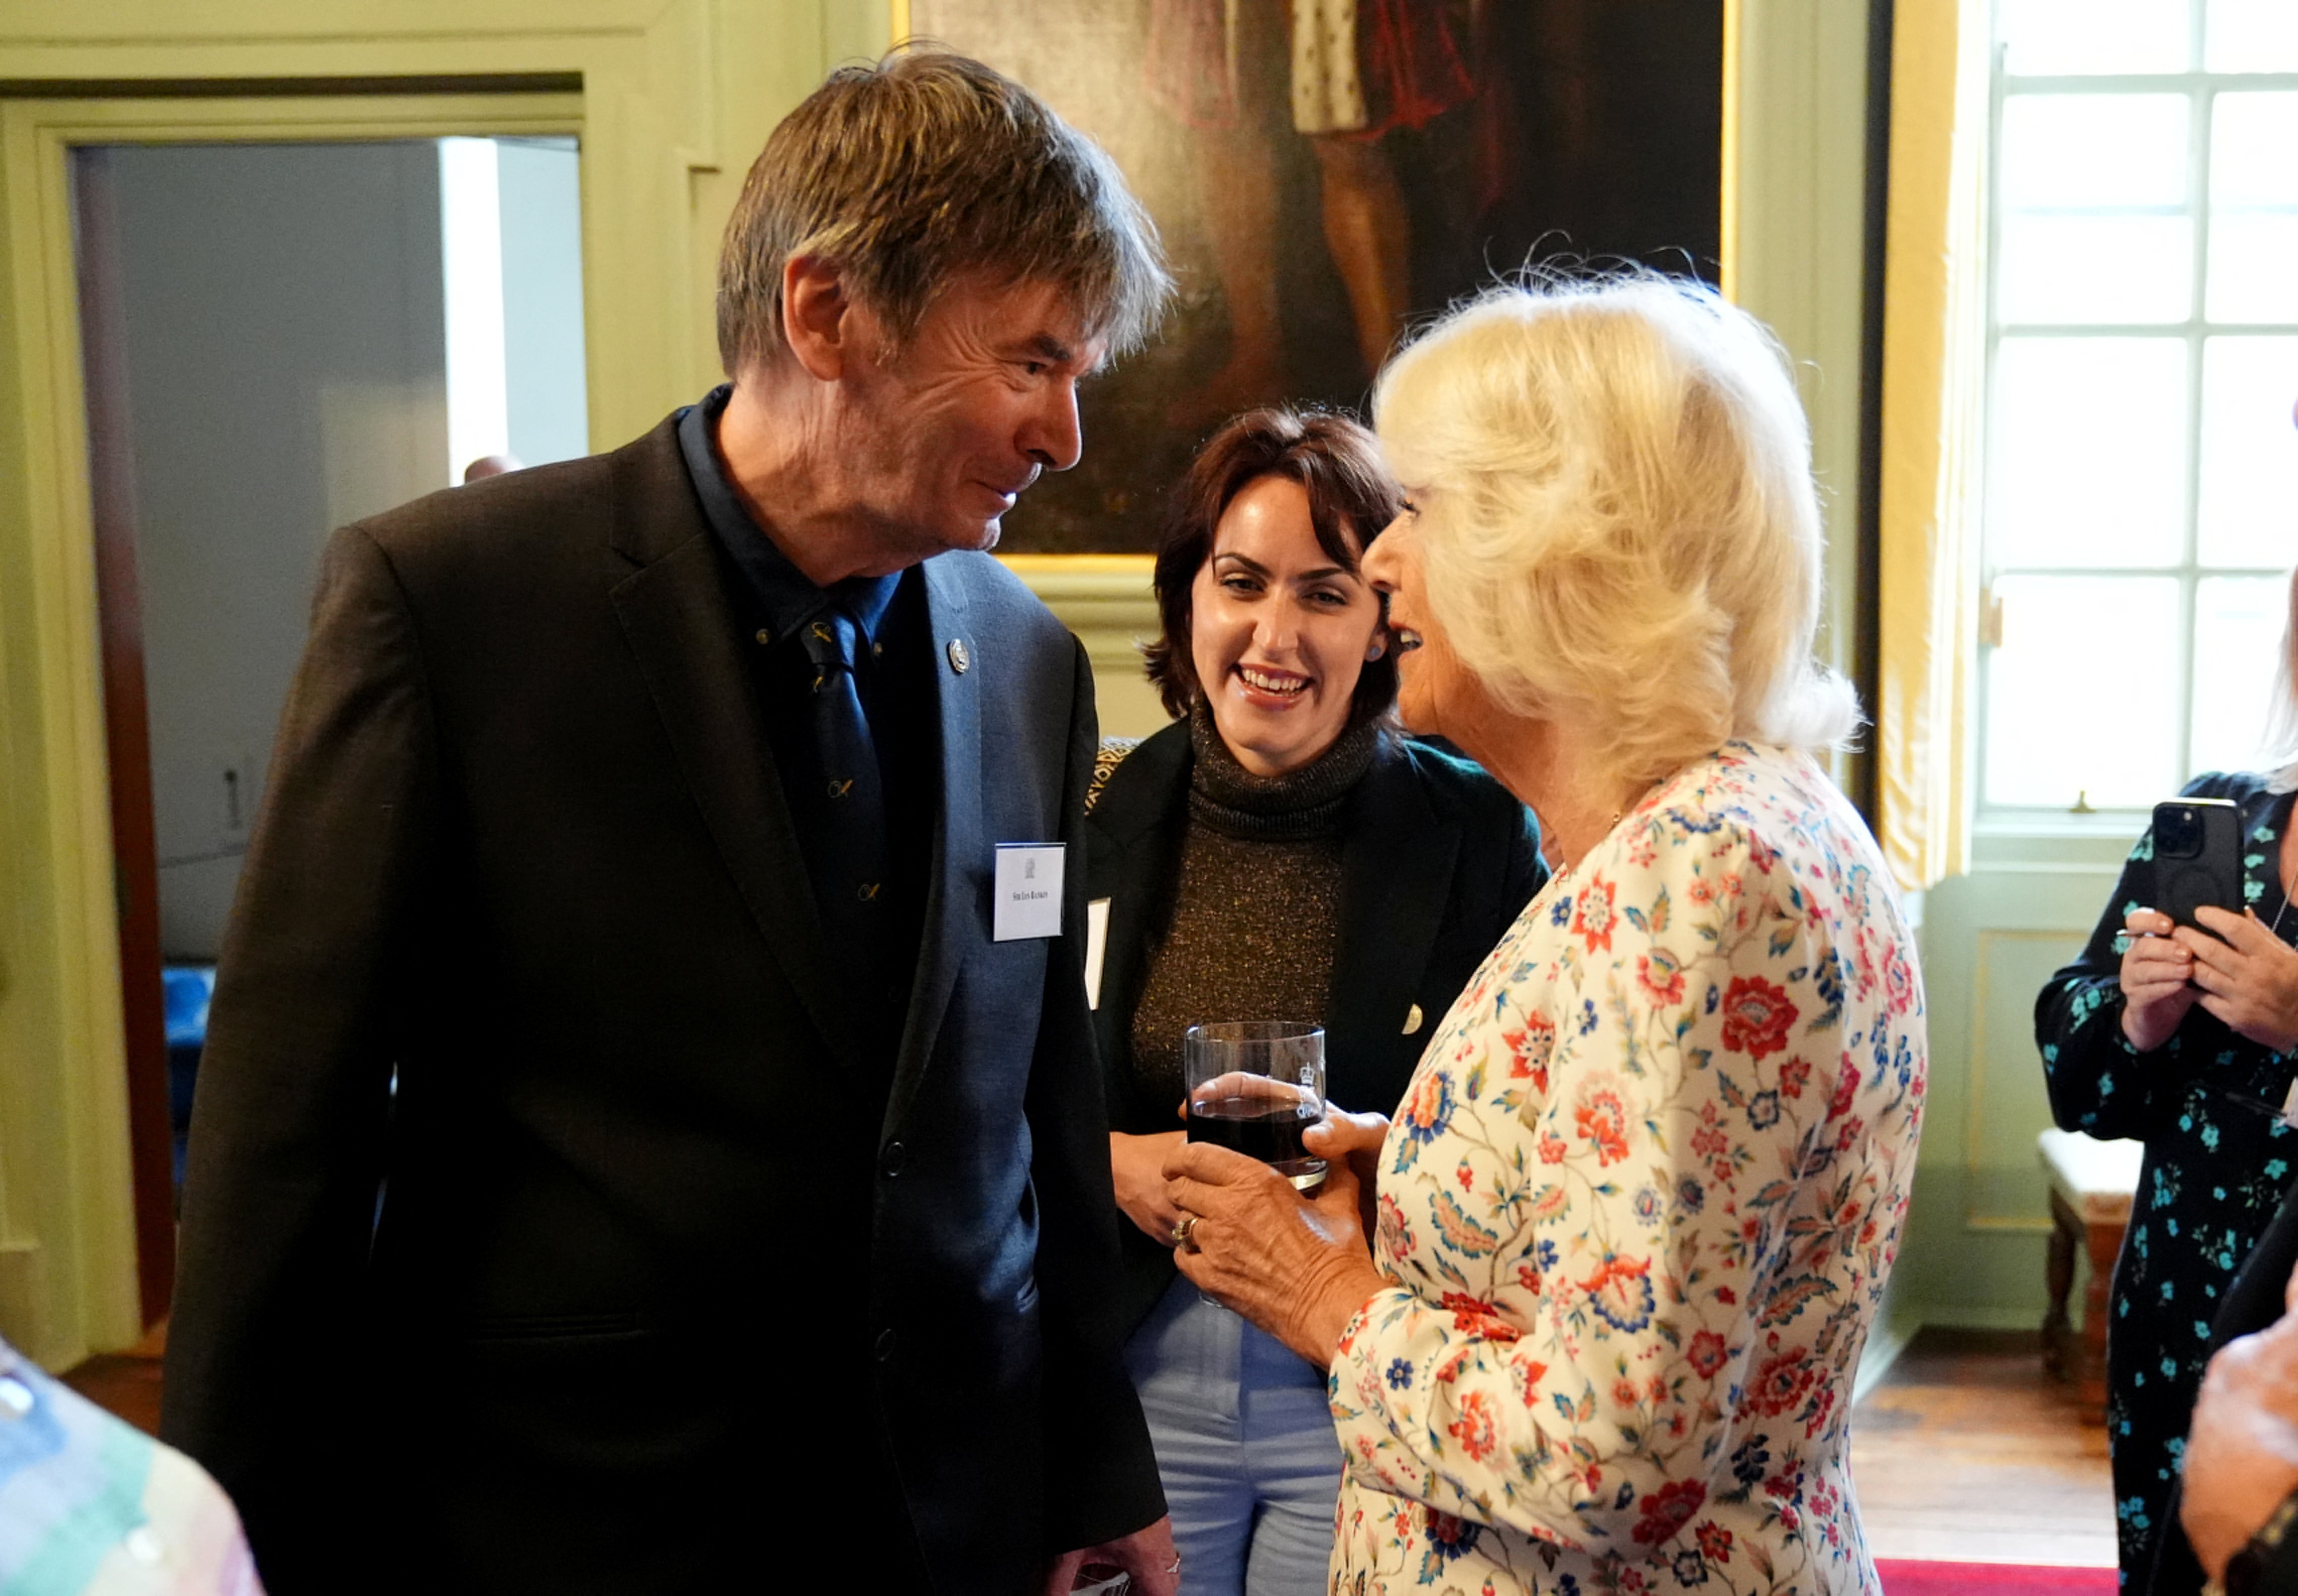 Ian Rankin was full of praise for the Queen Consort after yesterday’s event.